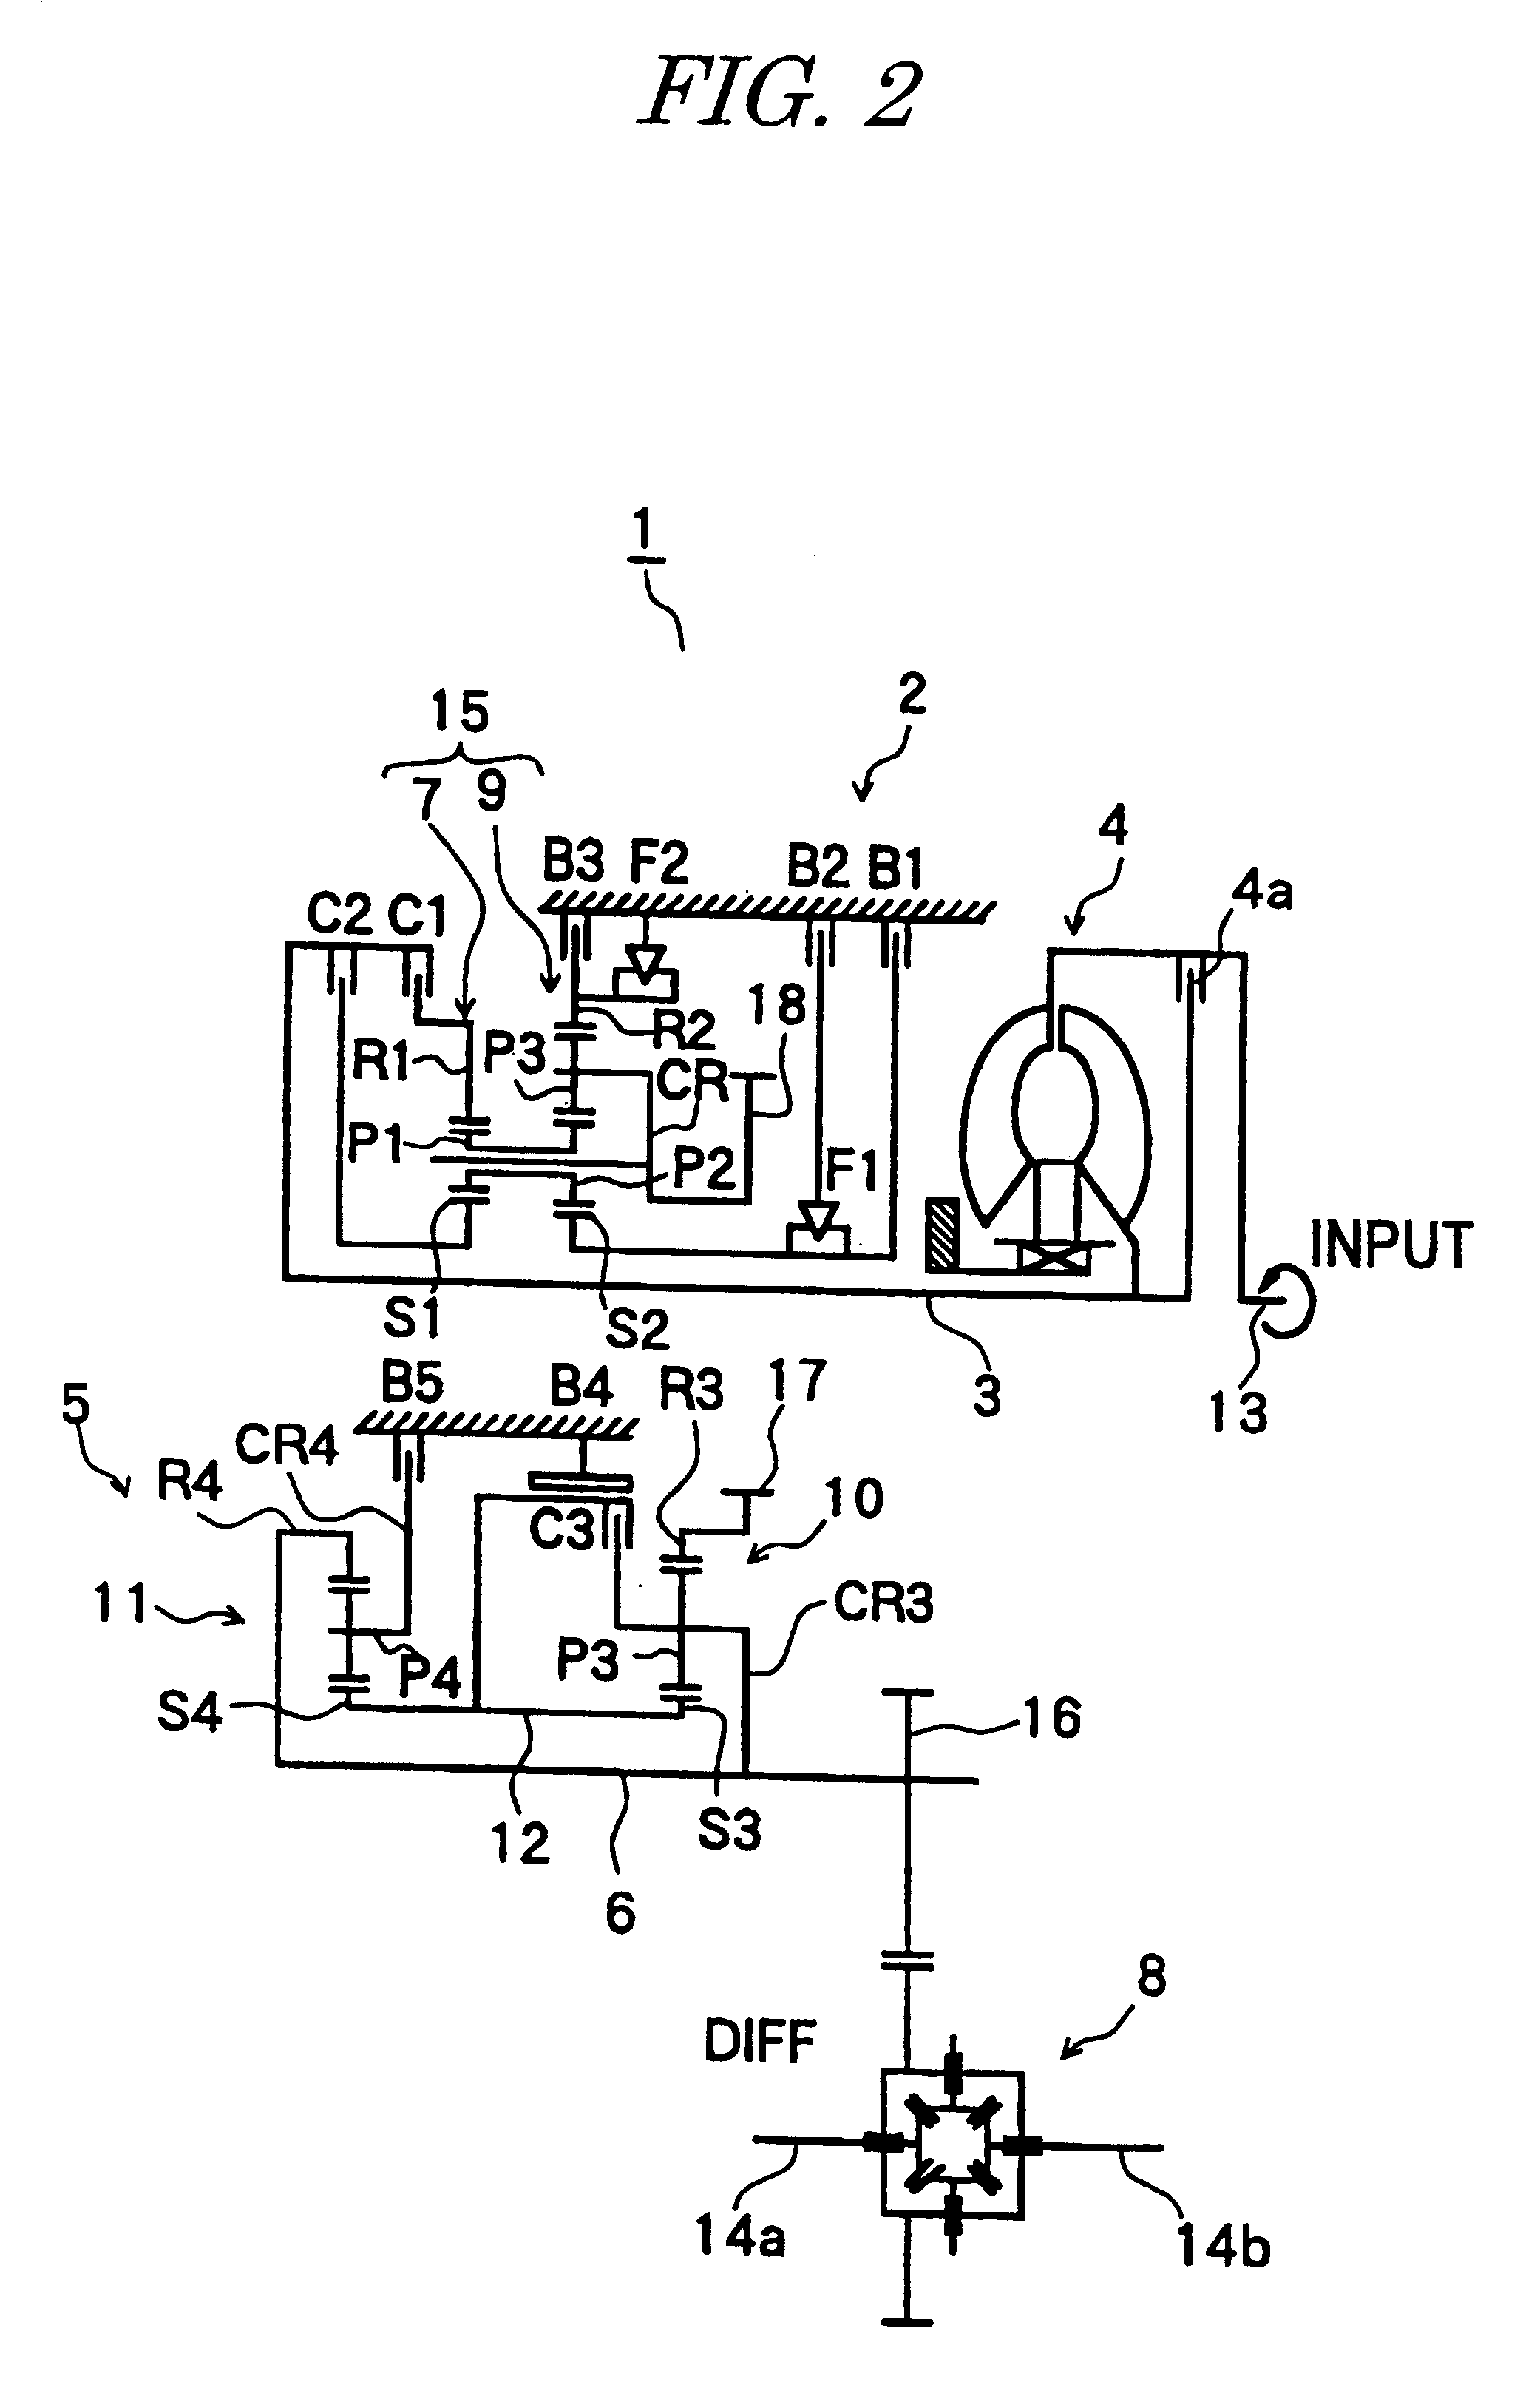 Engine torque control during multiple speed changes of an automatic transmission